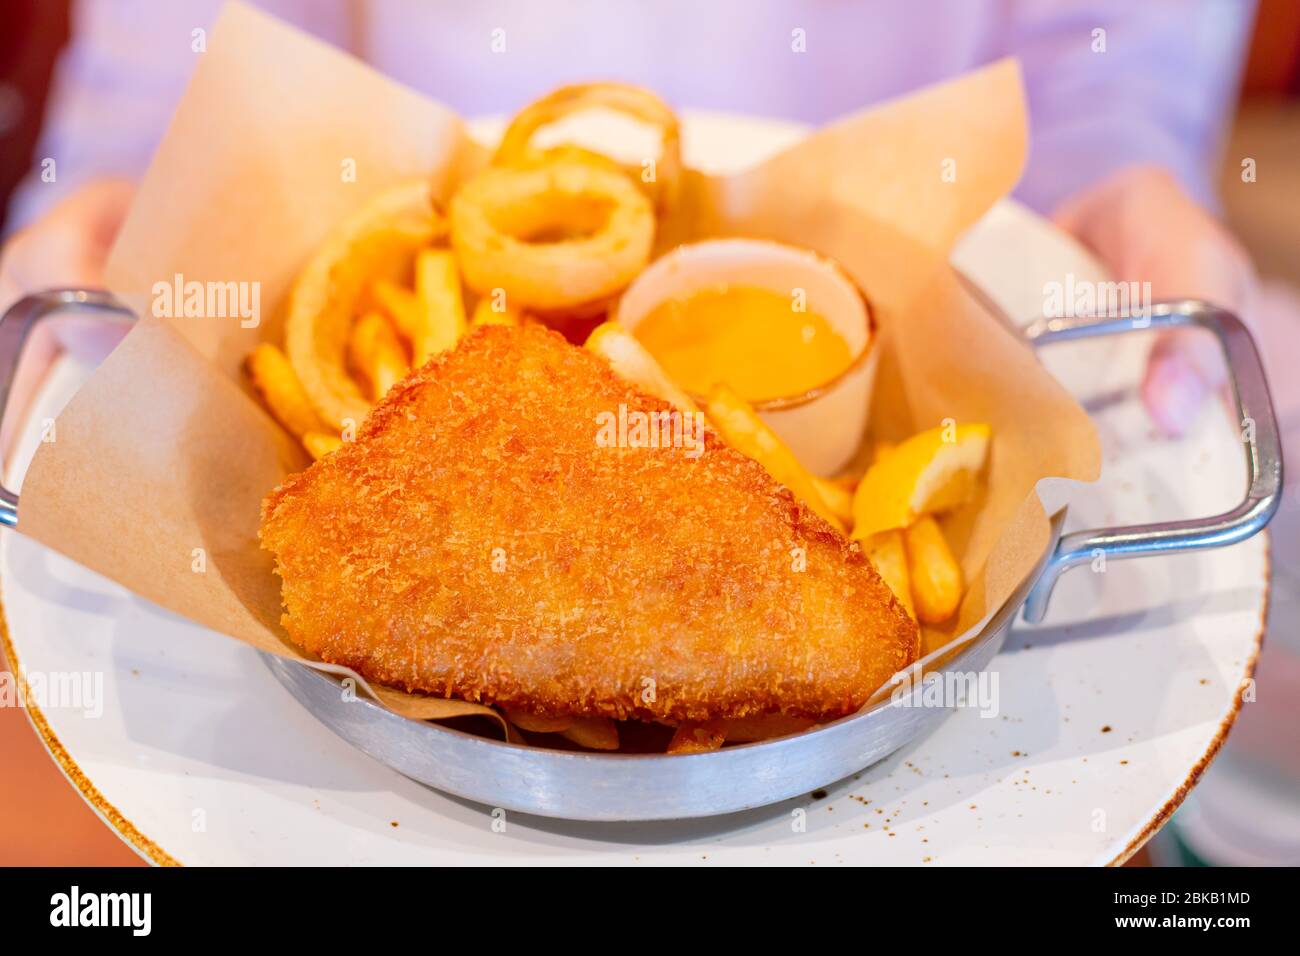 Delicious tasty look crispy fish and chip with dipping sauce fatty deep fried western food menu Stock Photo